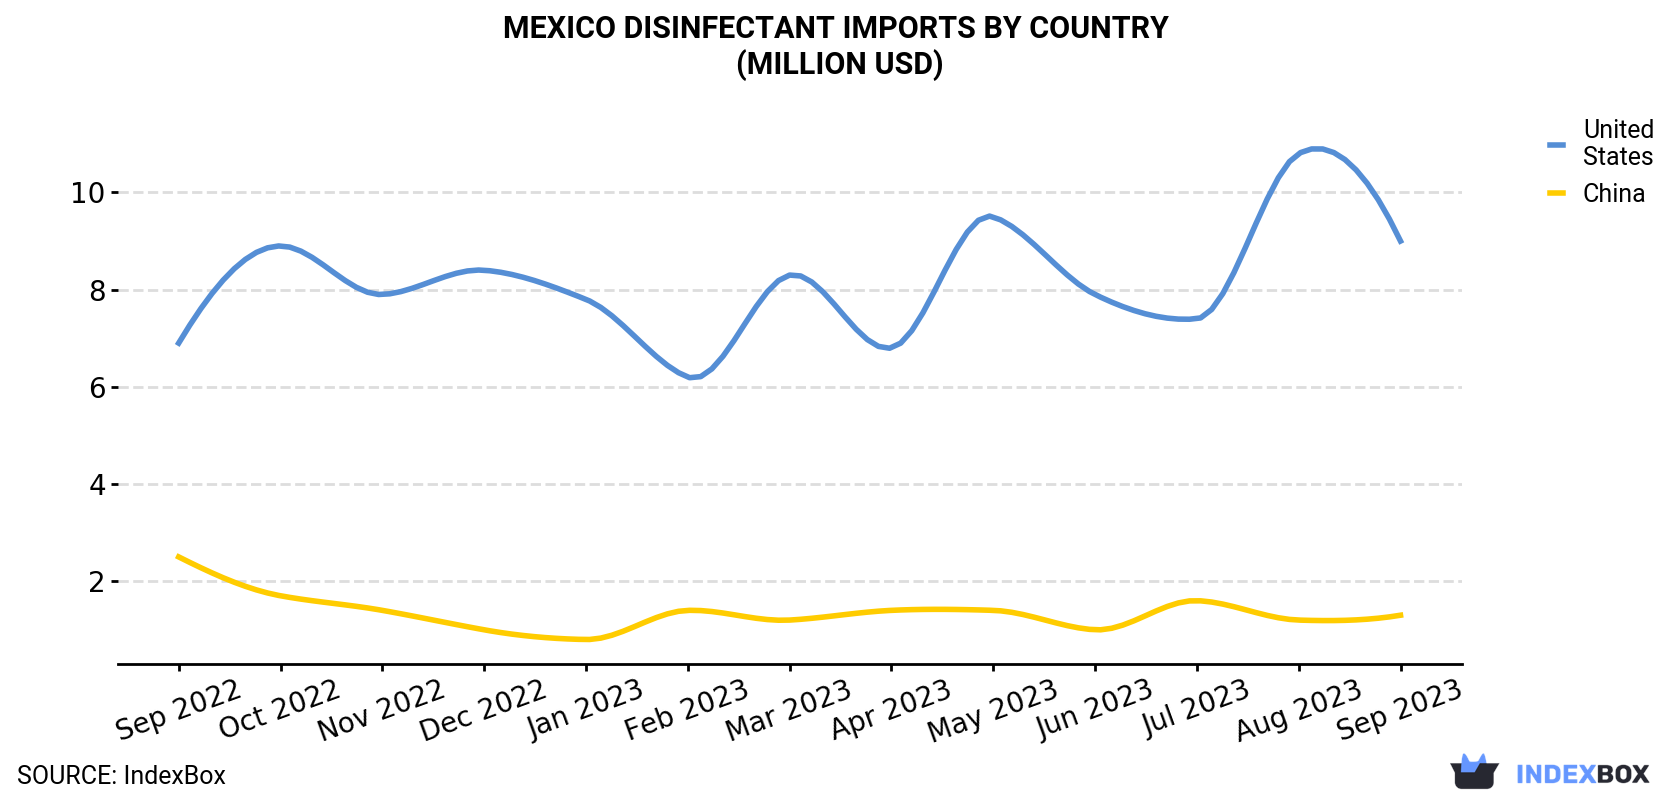 Mexico Disinfectant Imports By Country (Million USD)